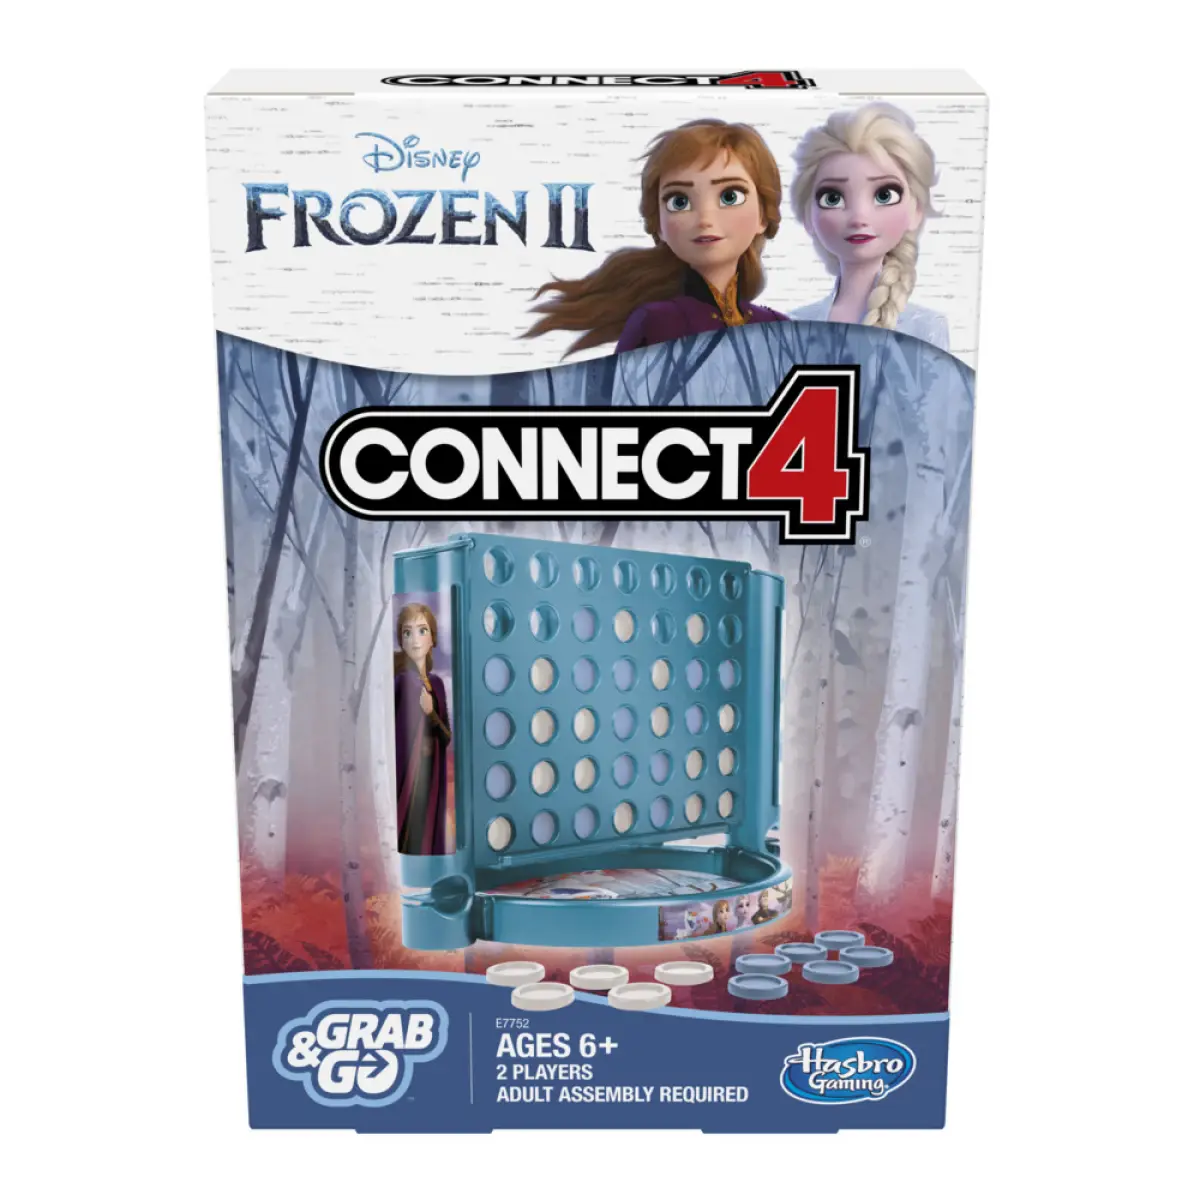 Hasbro Gaming Grab And Go Connect 4: Disney Frozen 2 Edition Game For Ages 6 And Up Portable 2 Player Game